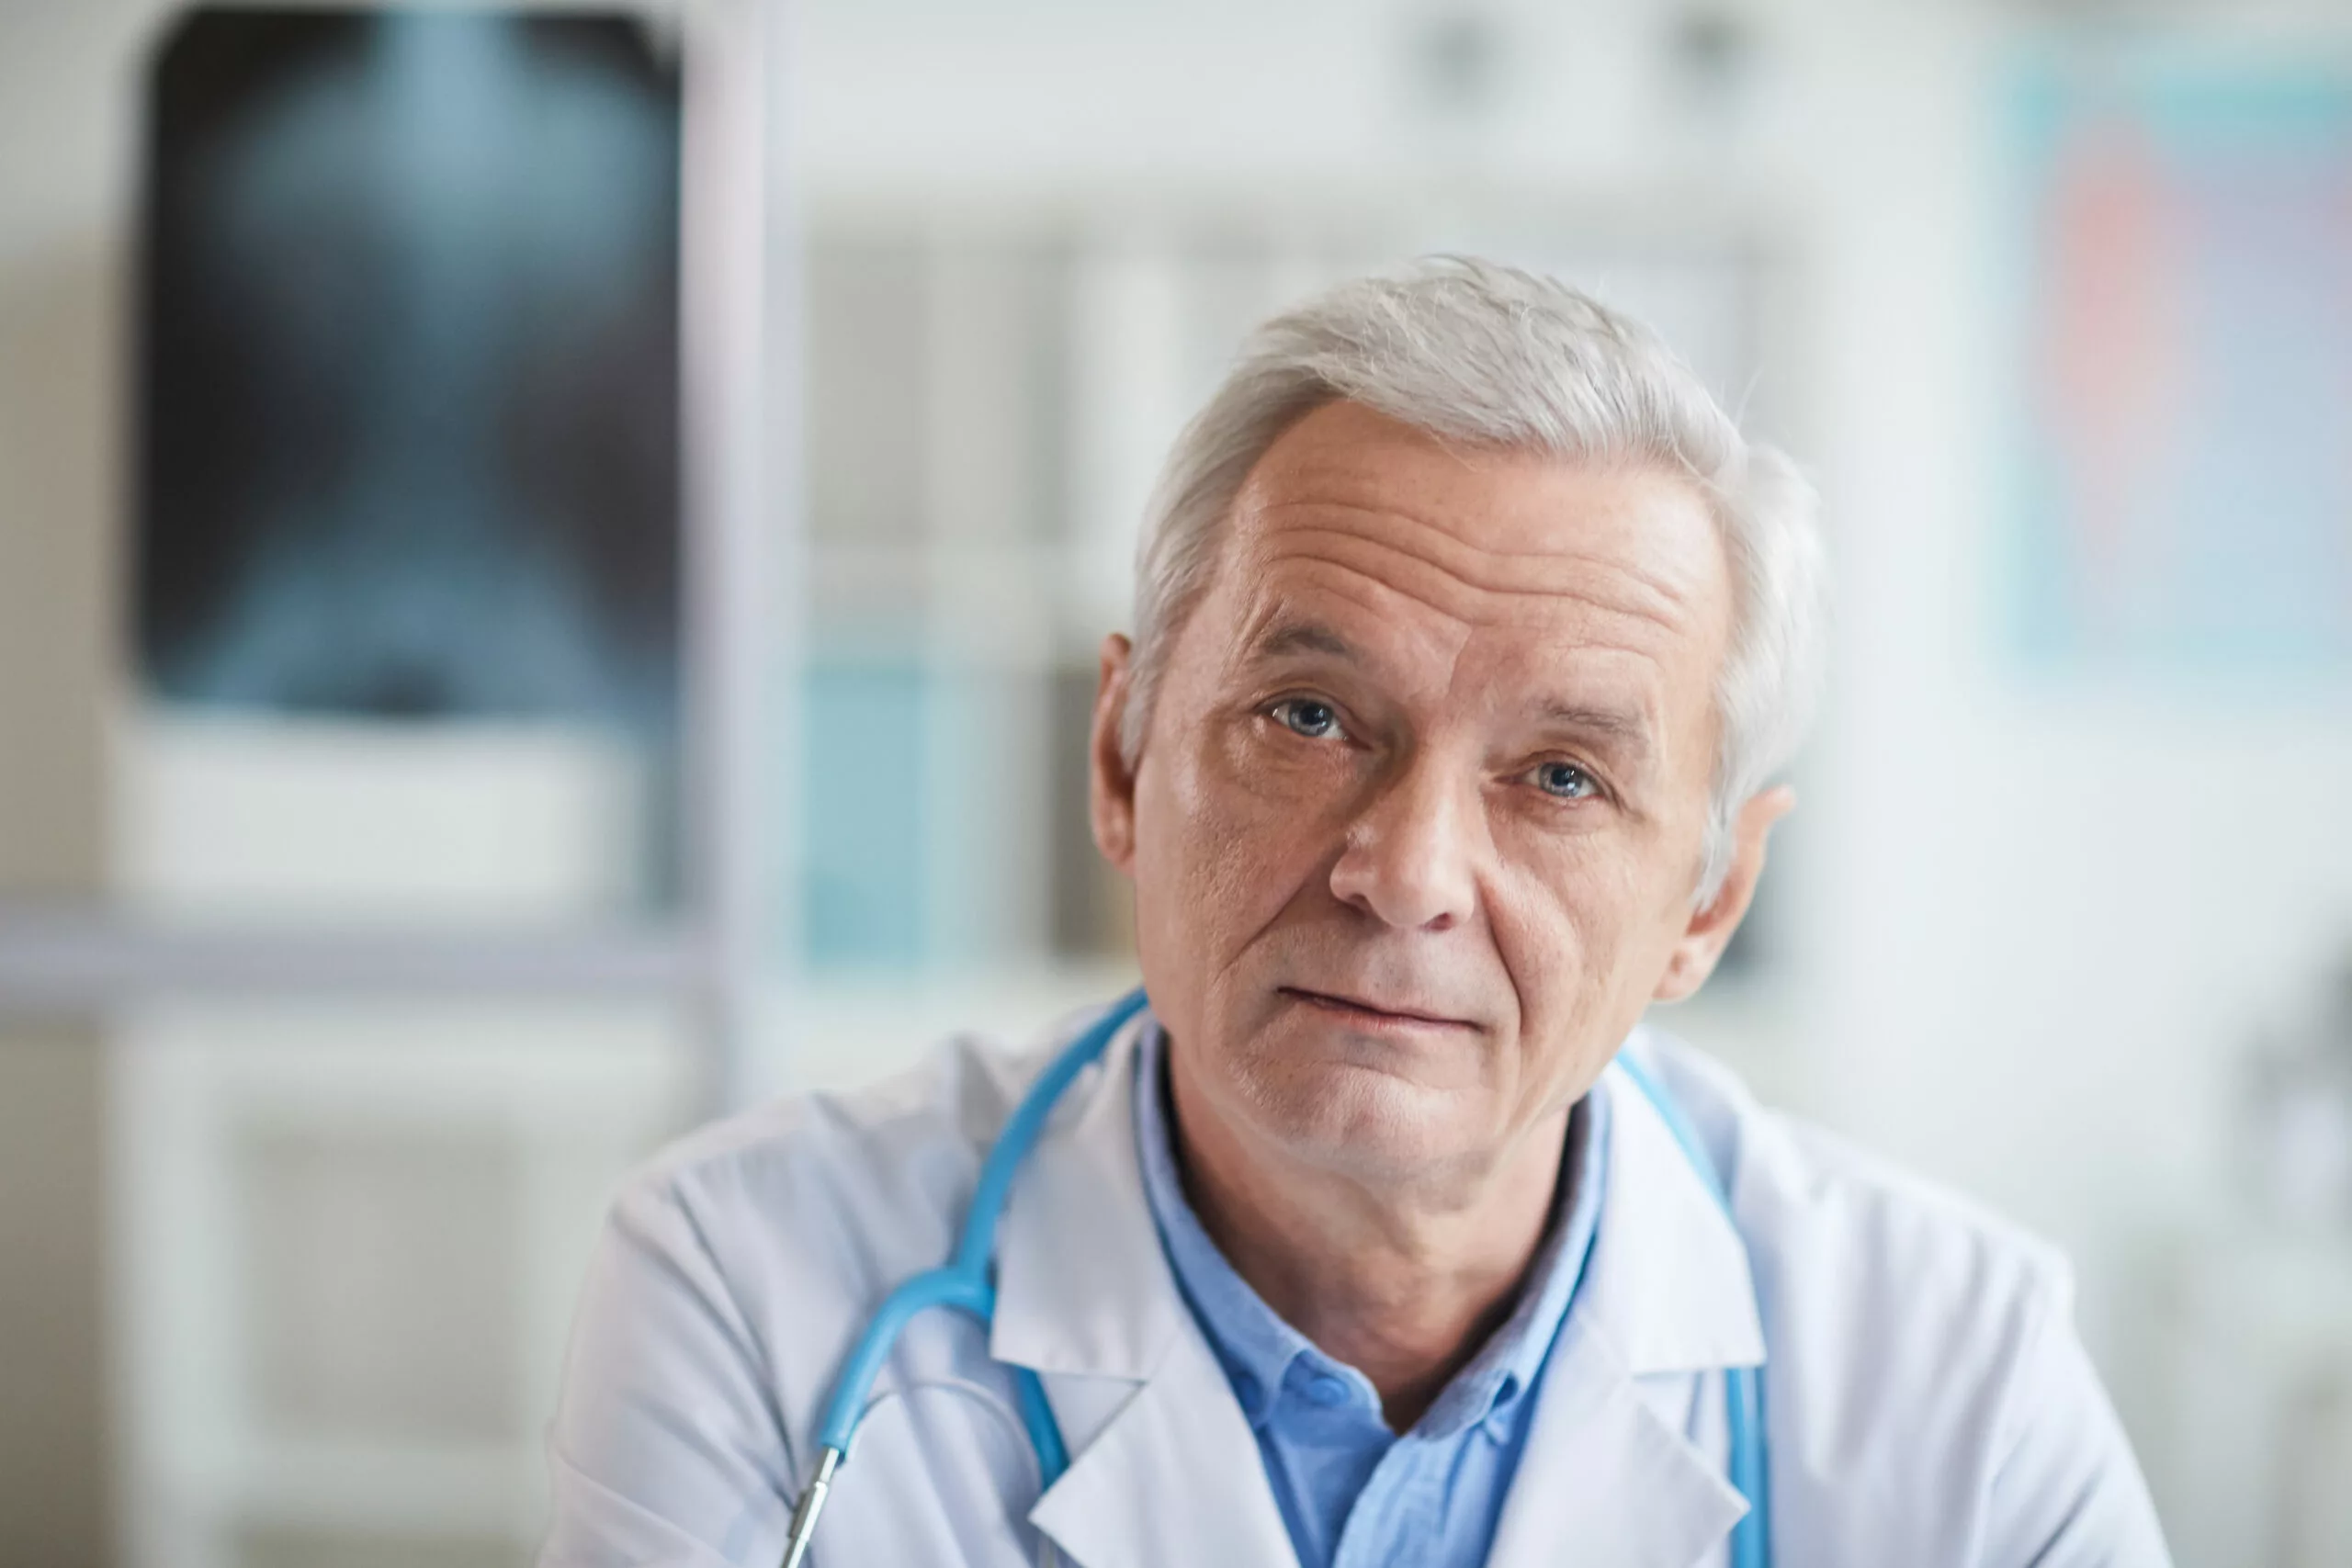 elder medical professional with white hair looking at camera